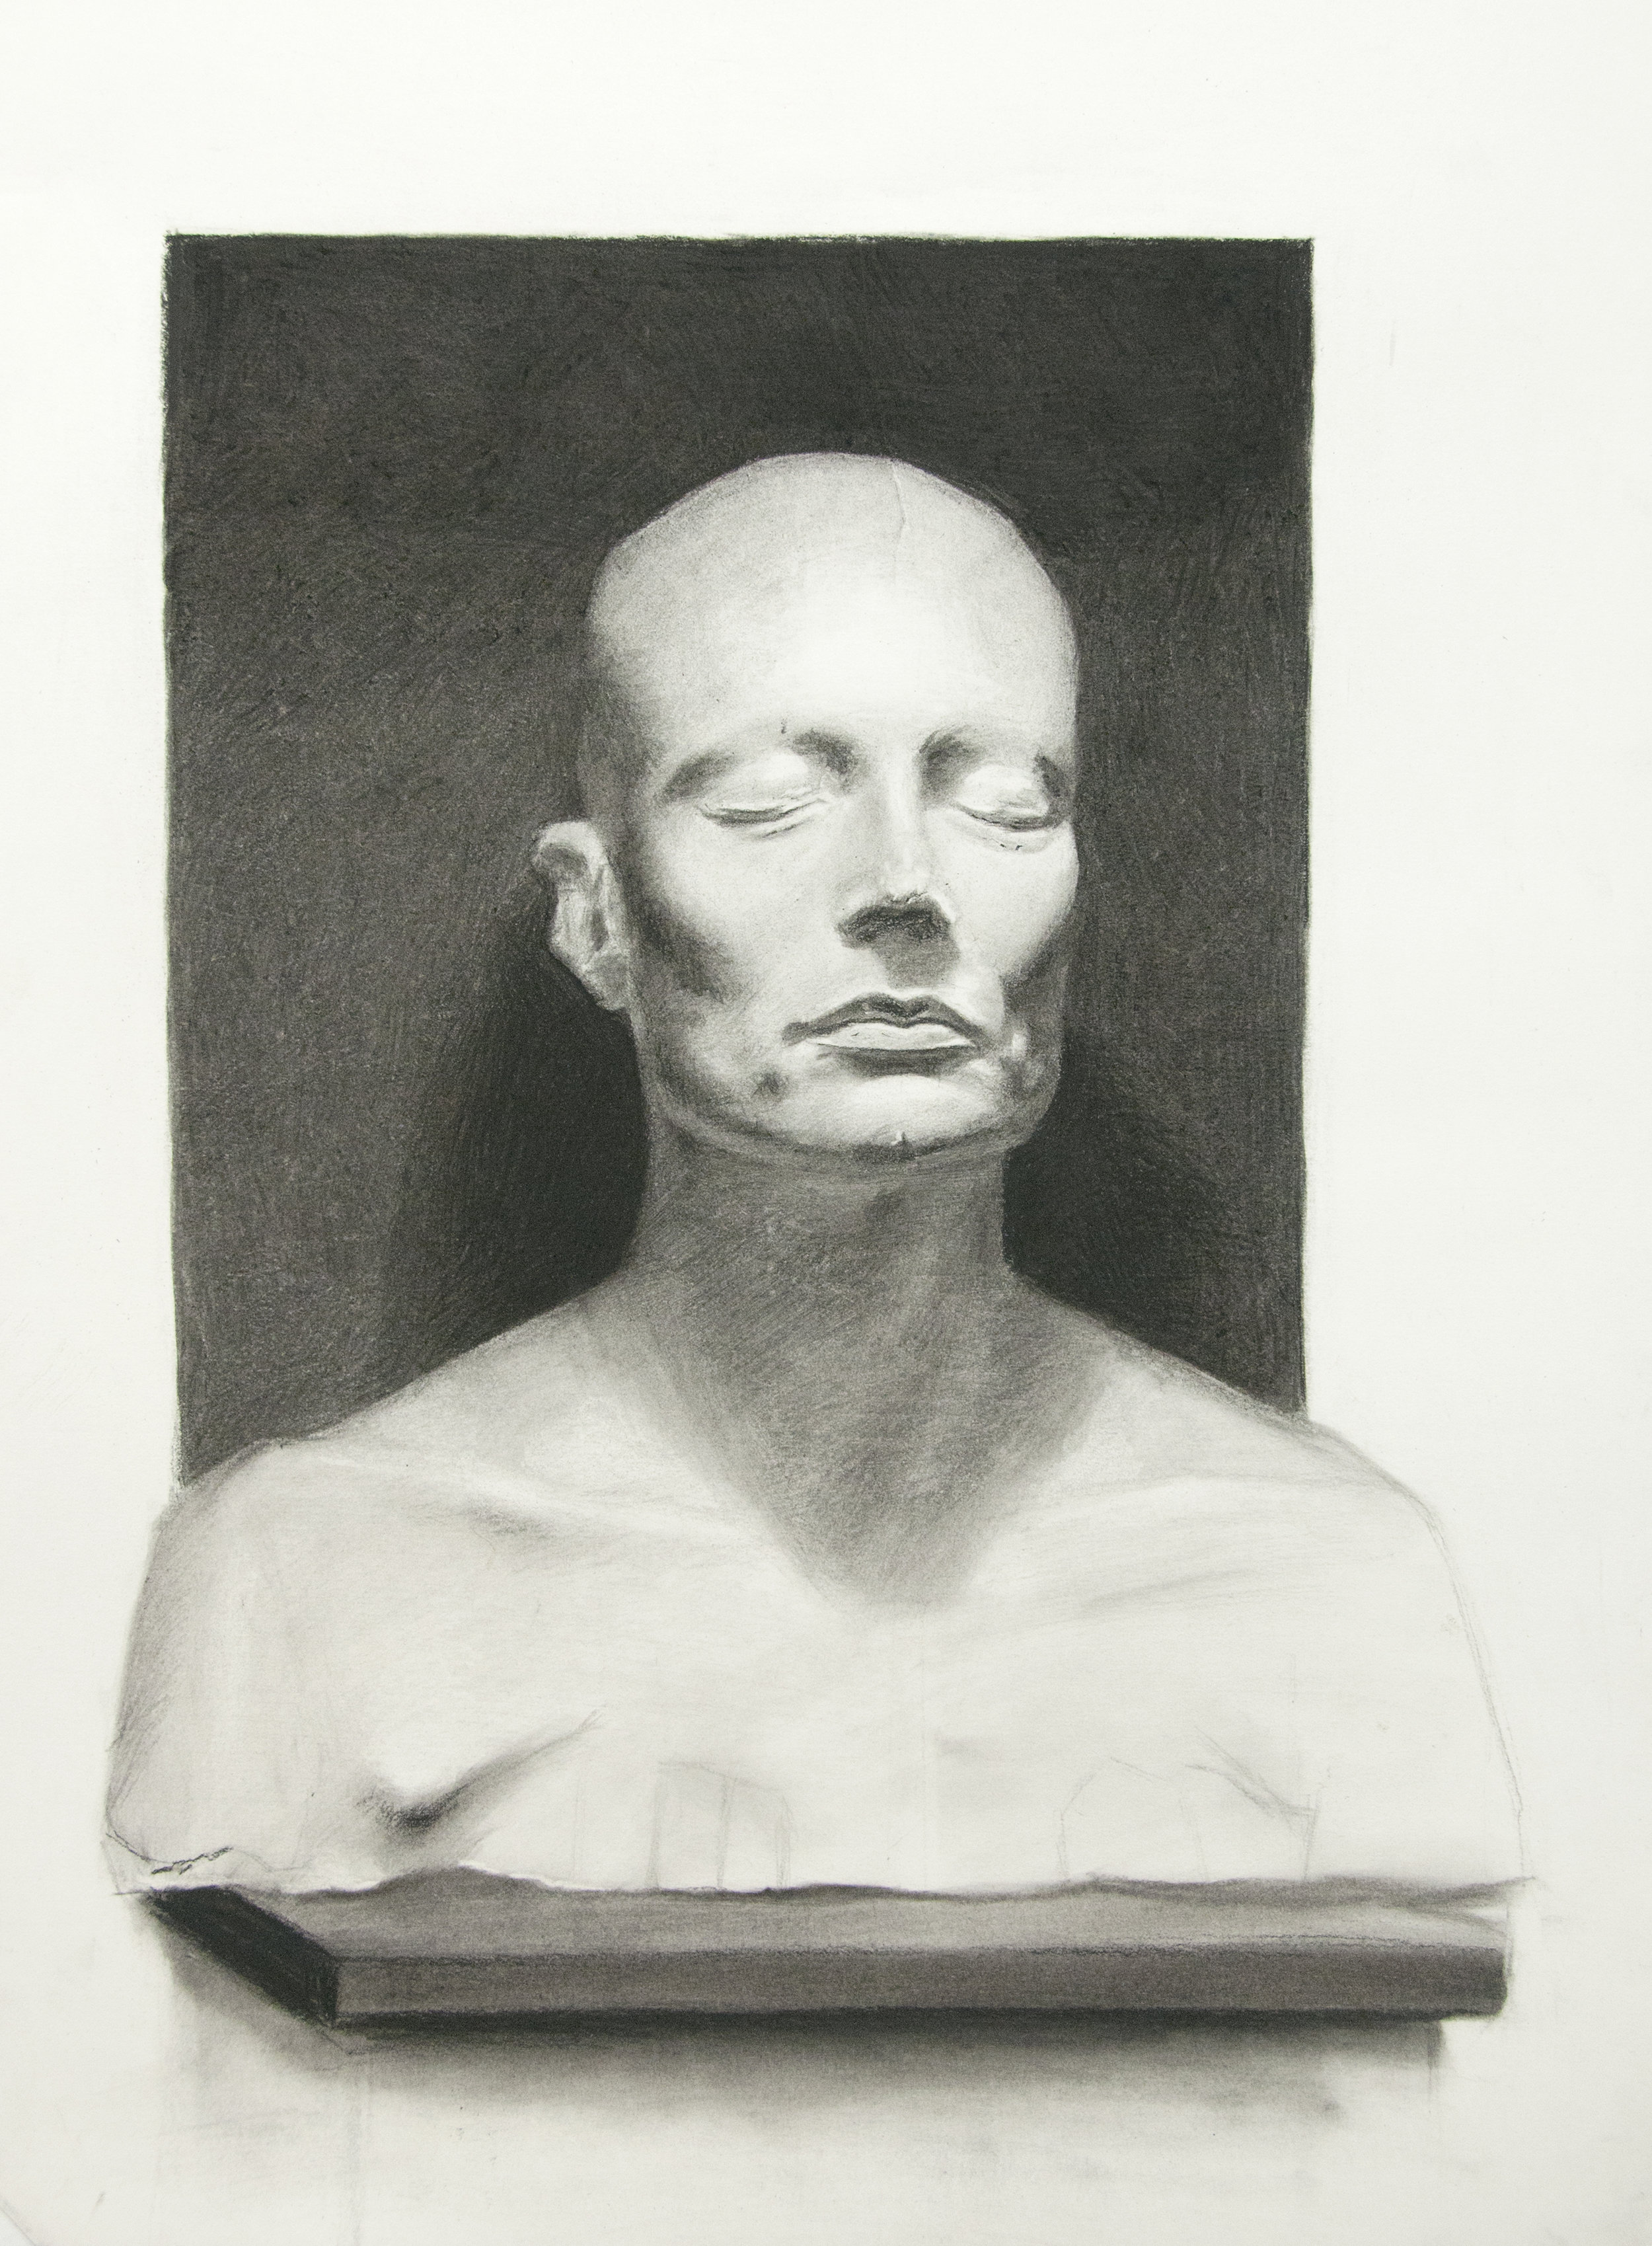  Charles Antolin, cast drawing student. 